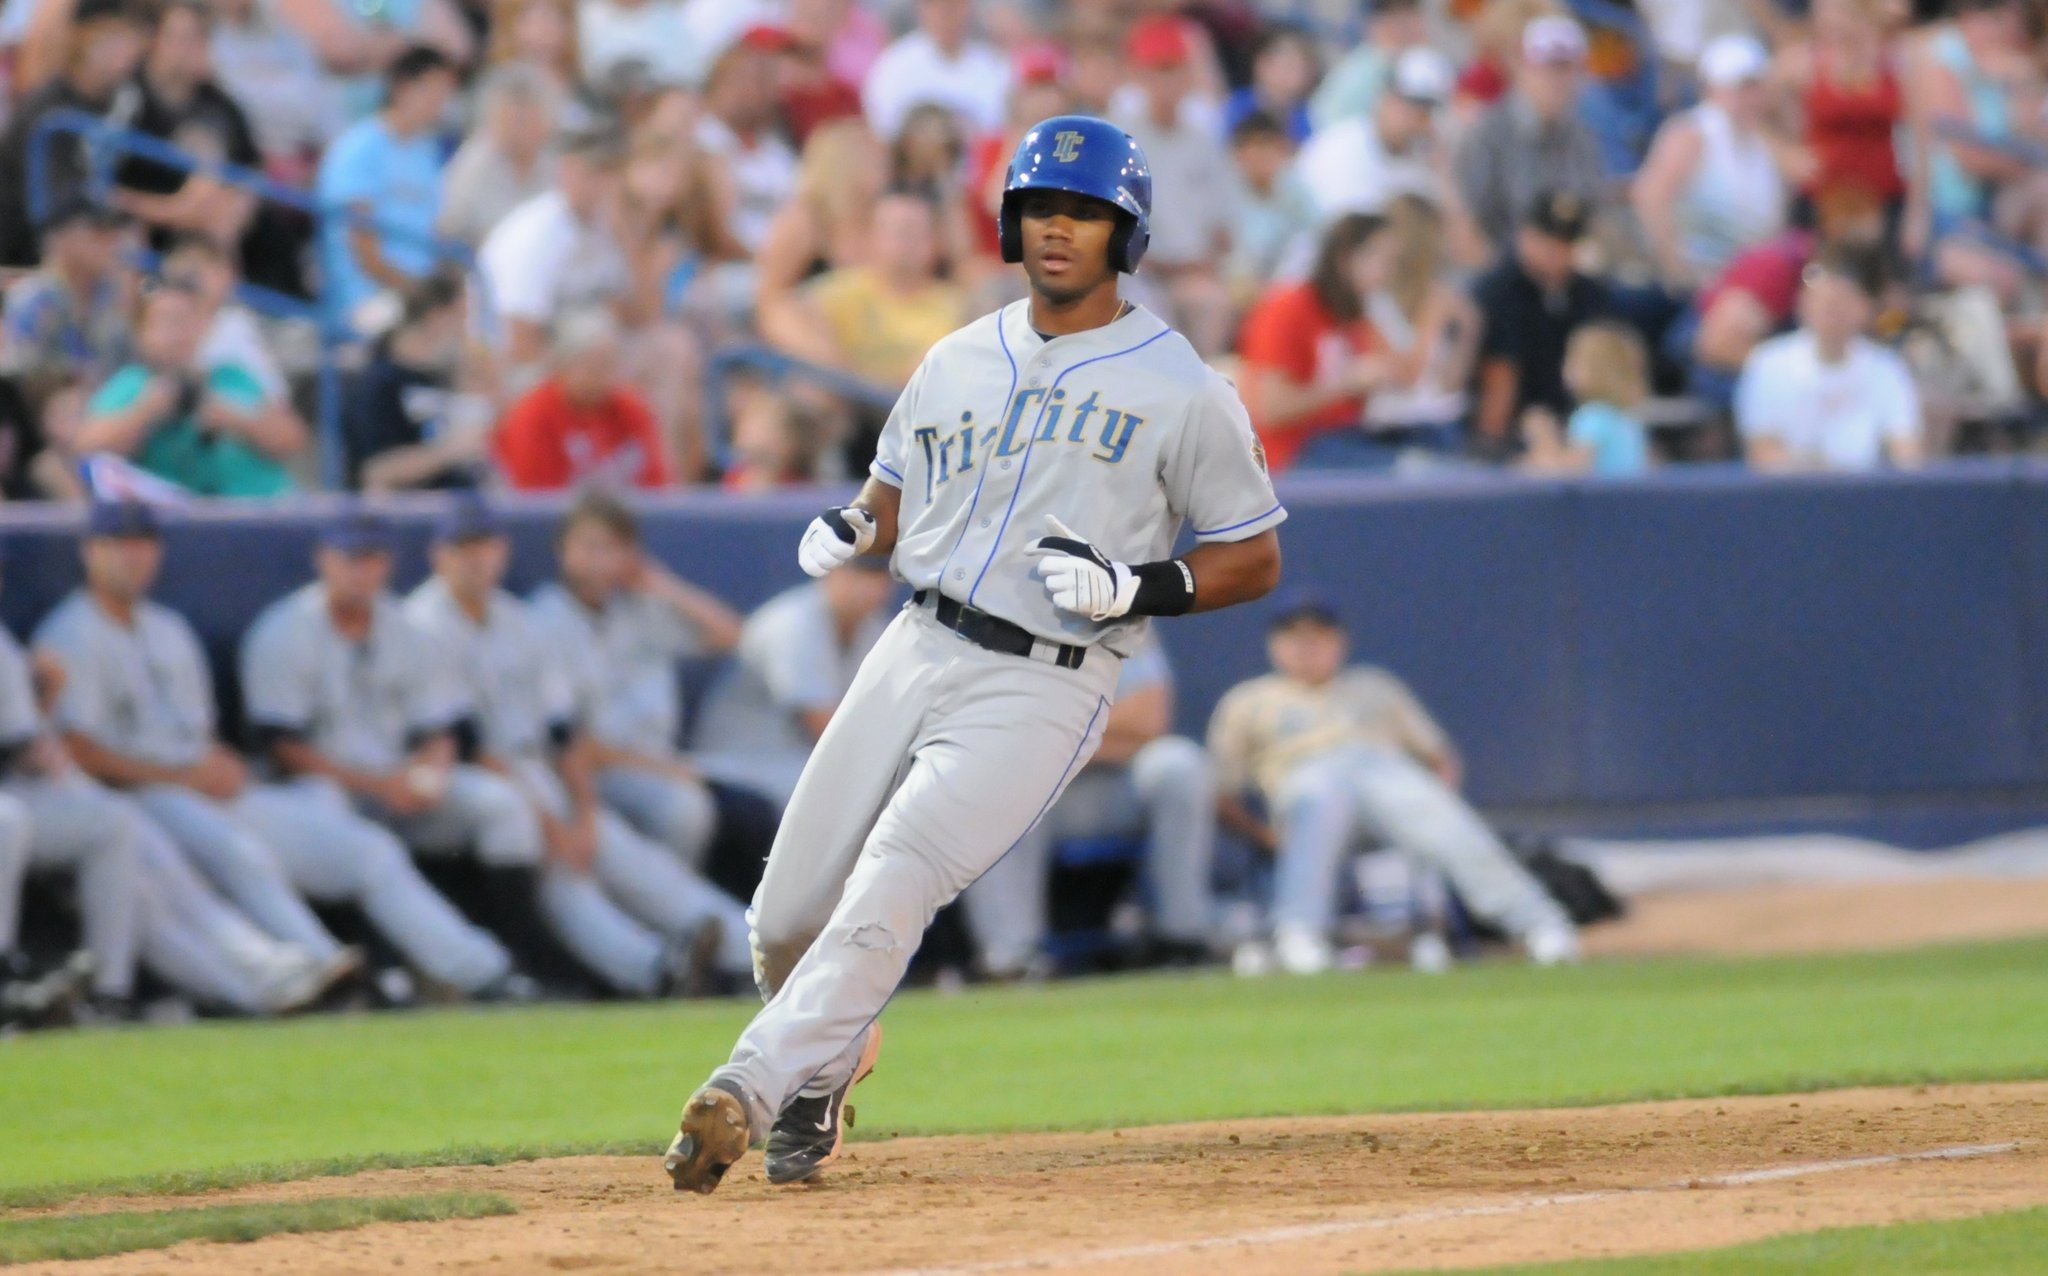 Happy Birthday to Northwest League alum and Super Bowl champion Russell Wilson! 